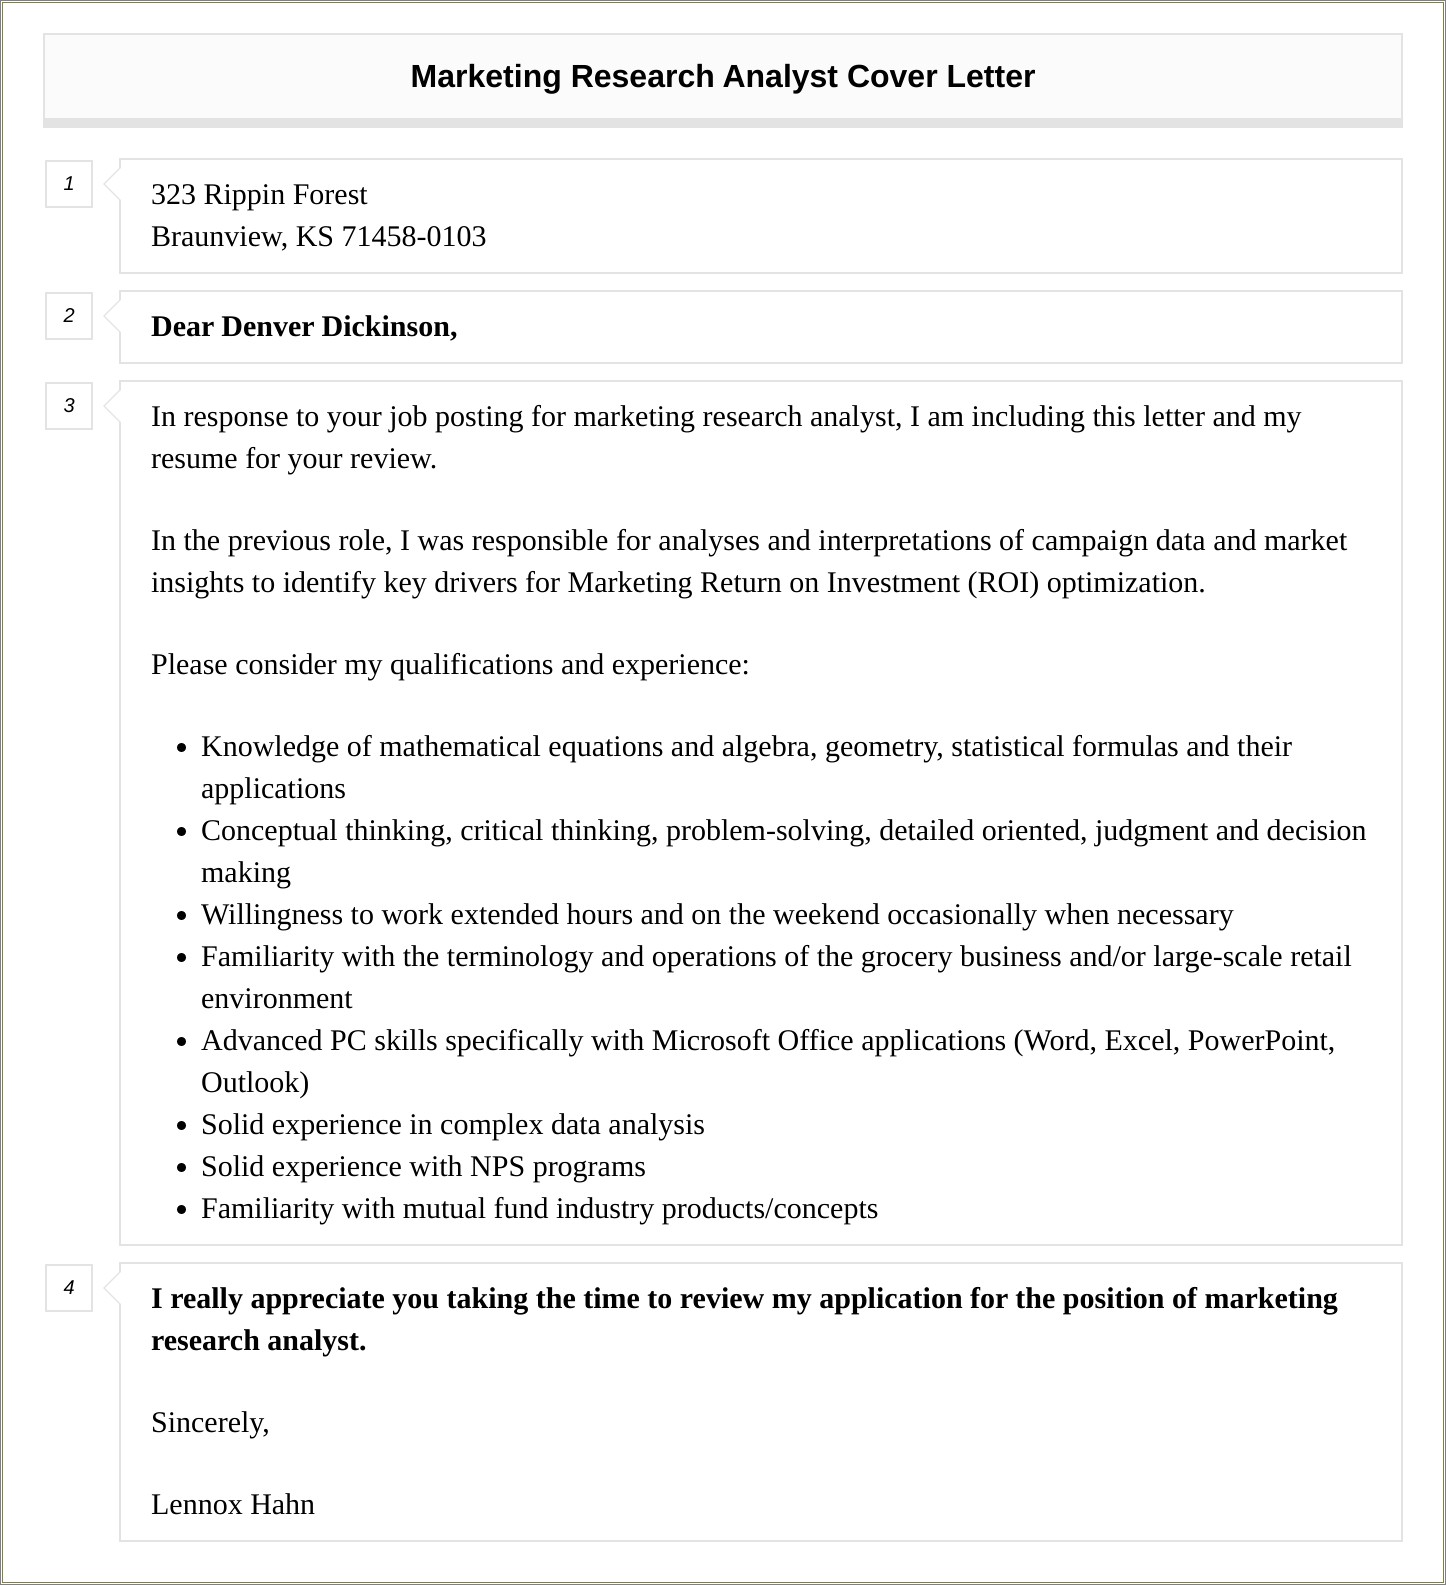 Market Research Analyst Resume Cover Letter